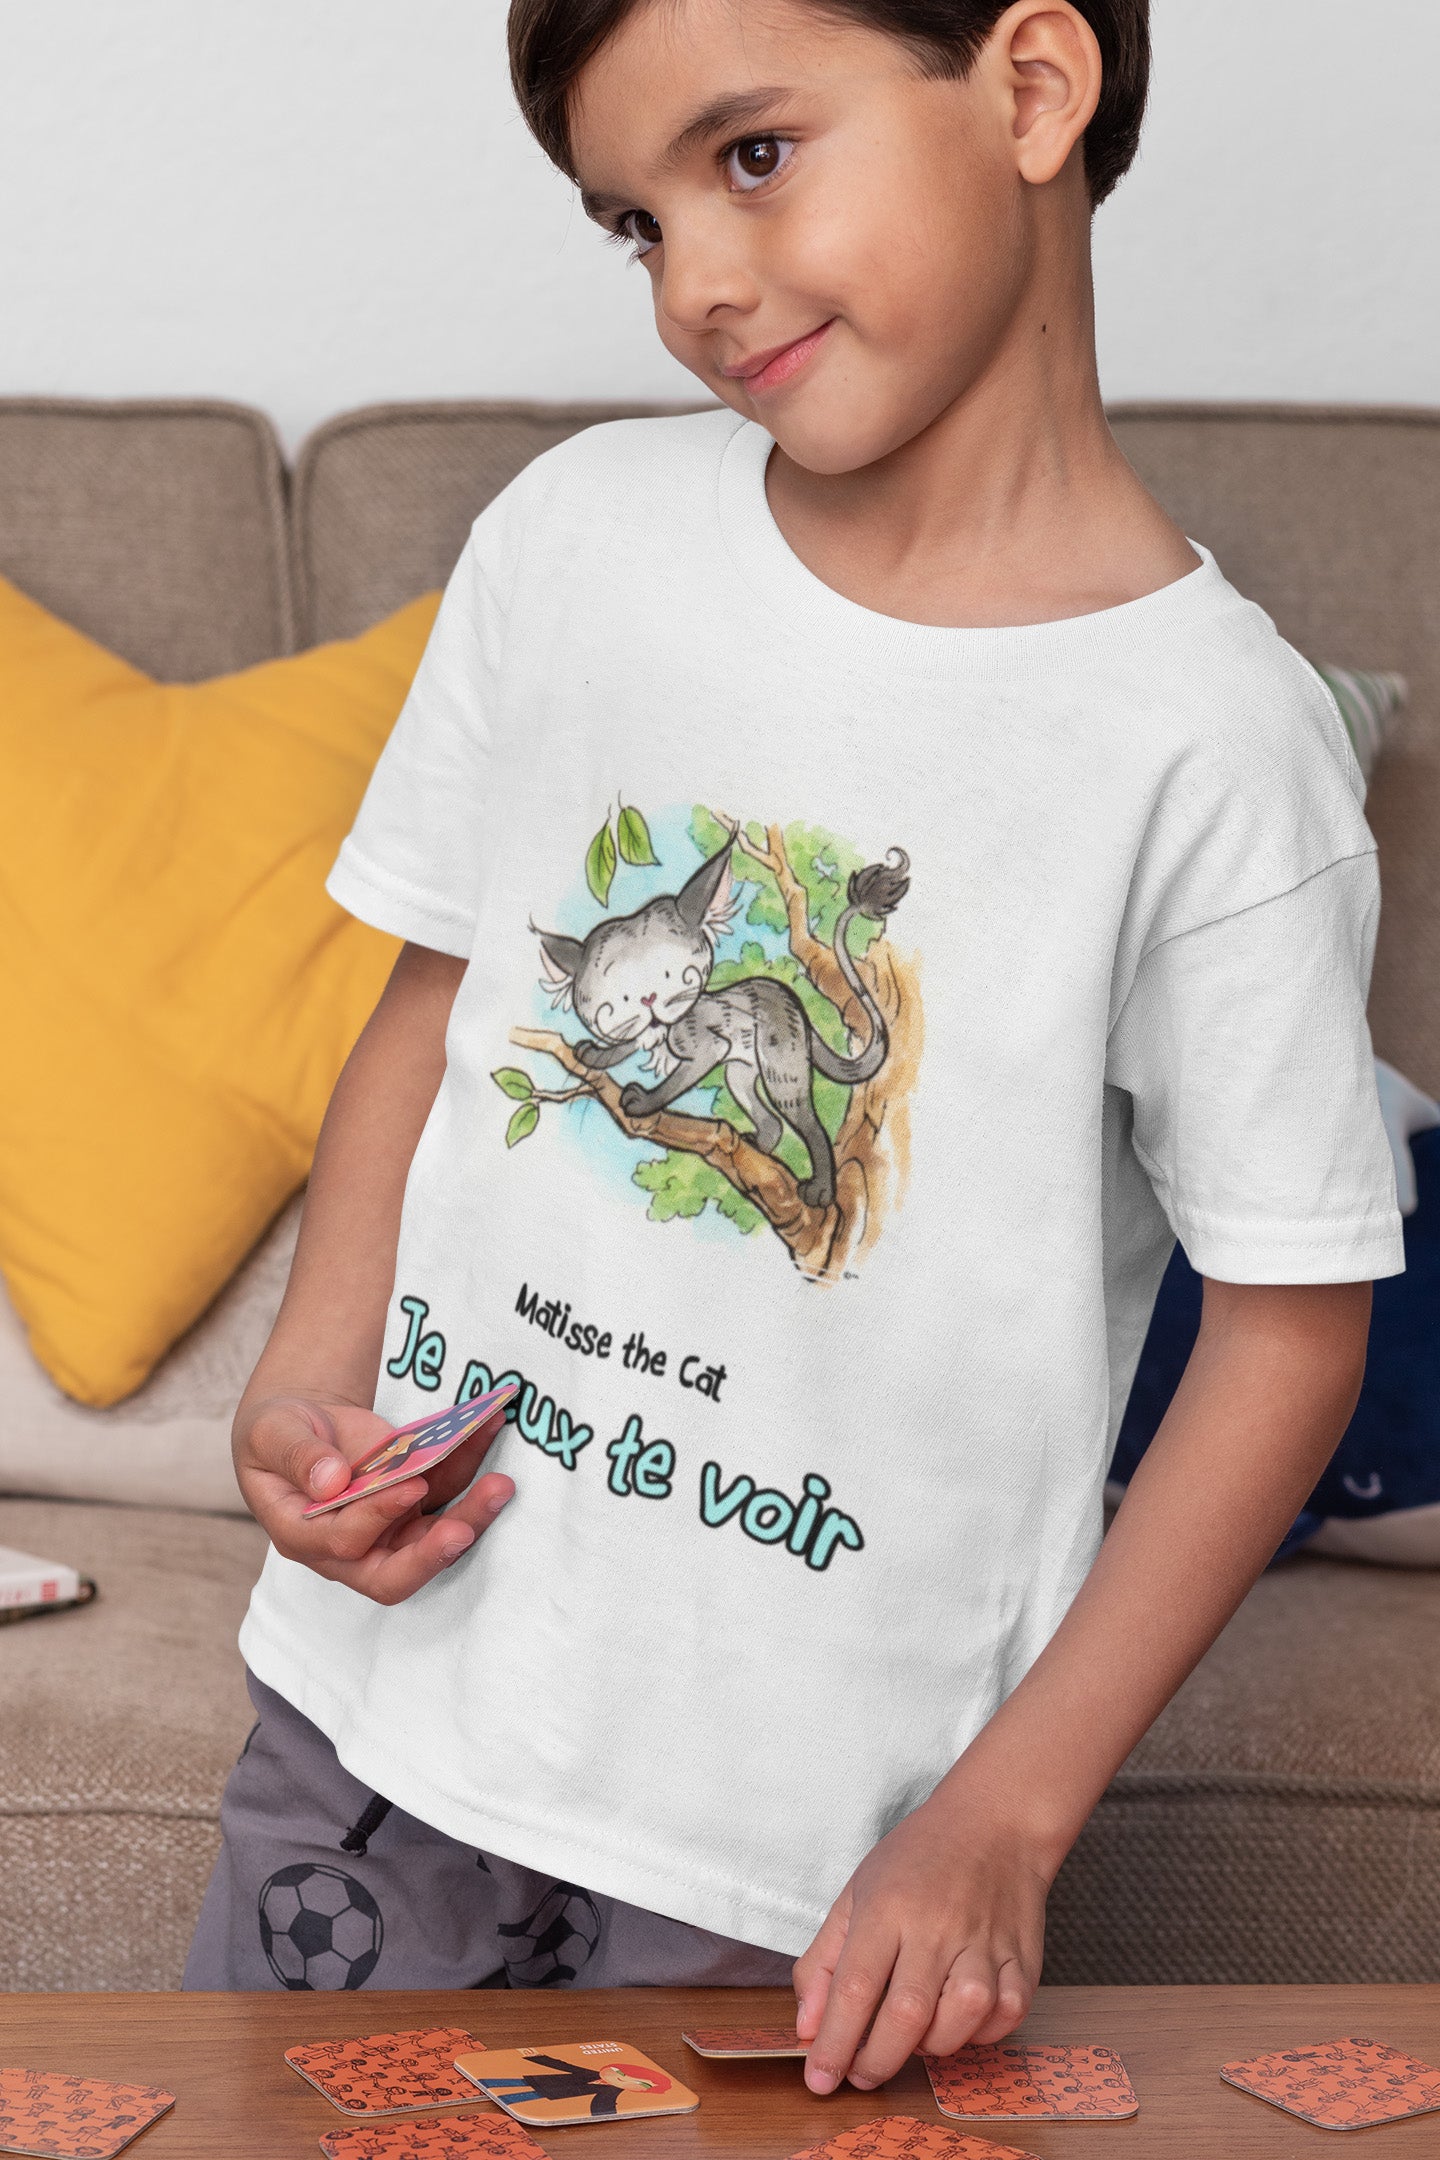 A white official, Matisse the Cat children’s t-shirt with the slogan ‘Je peux te voir’ showcases Matisse sitting in his garden smiling with a sleeping hedgehog curled up beside him resting on his leg. Worn by a young boy playing a card game in his living room.